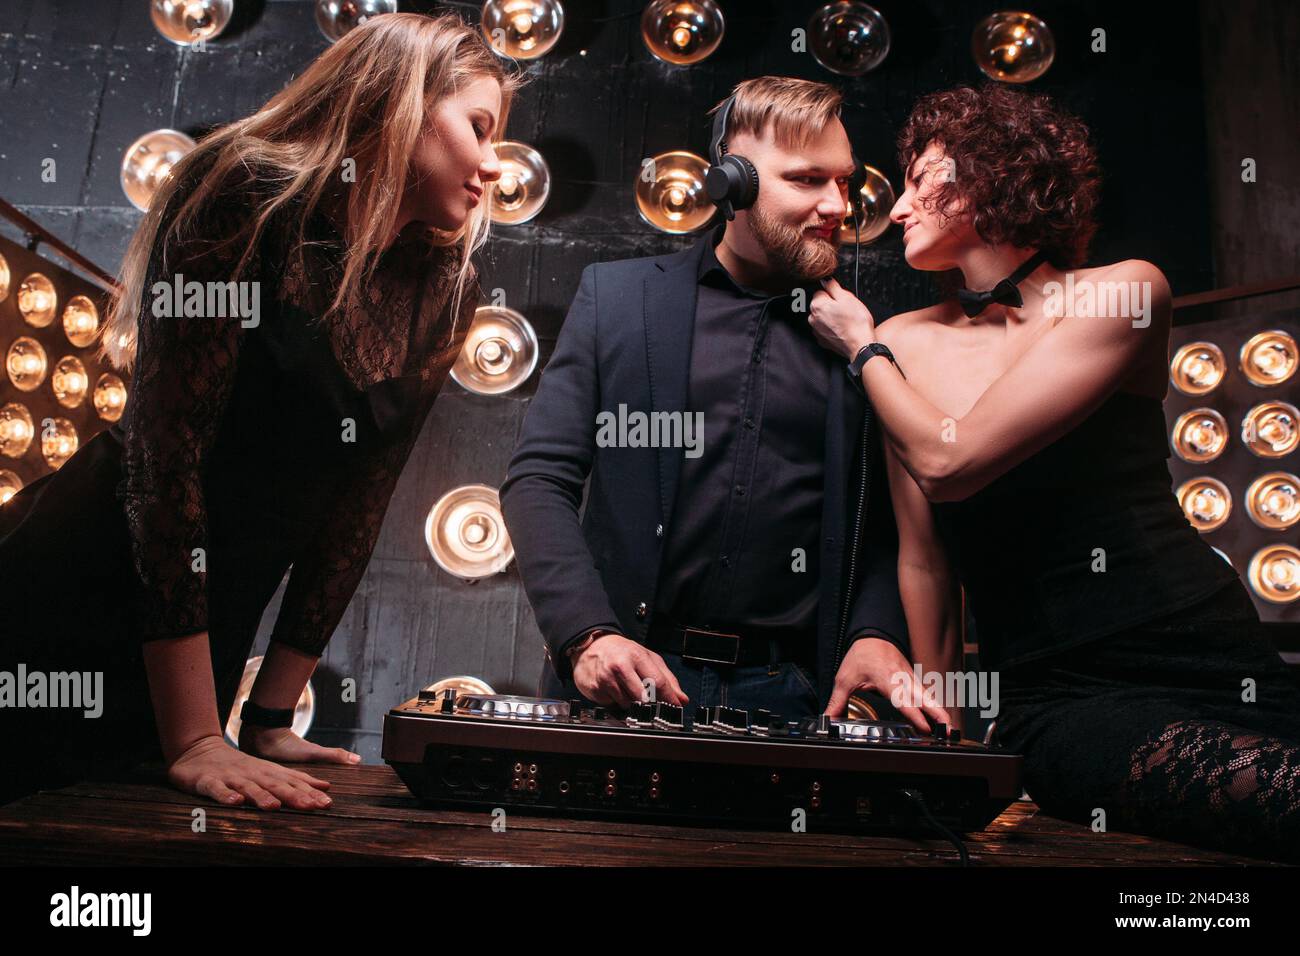 Two young girls flirt with DJ at nightclub party Stock Photo